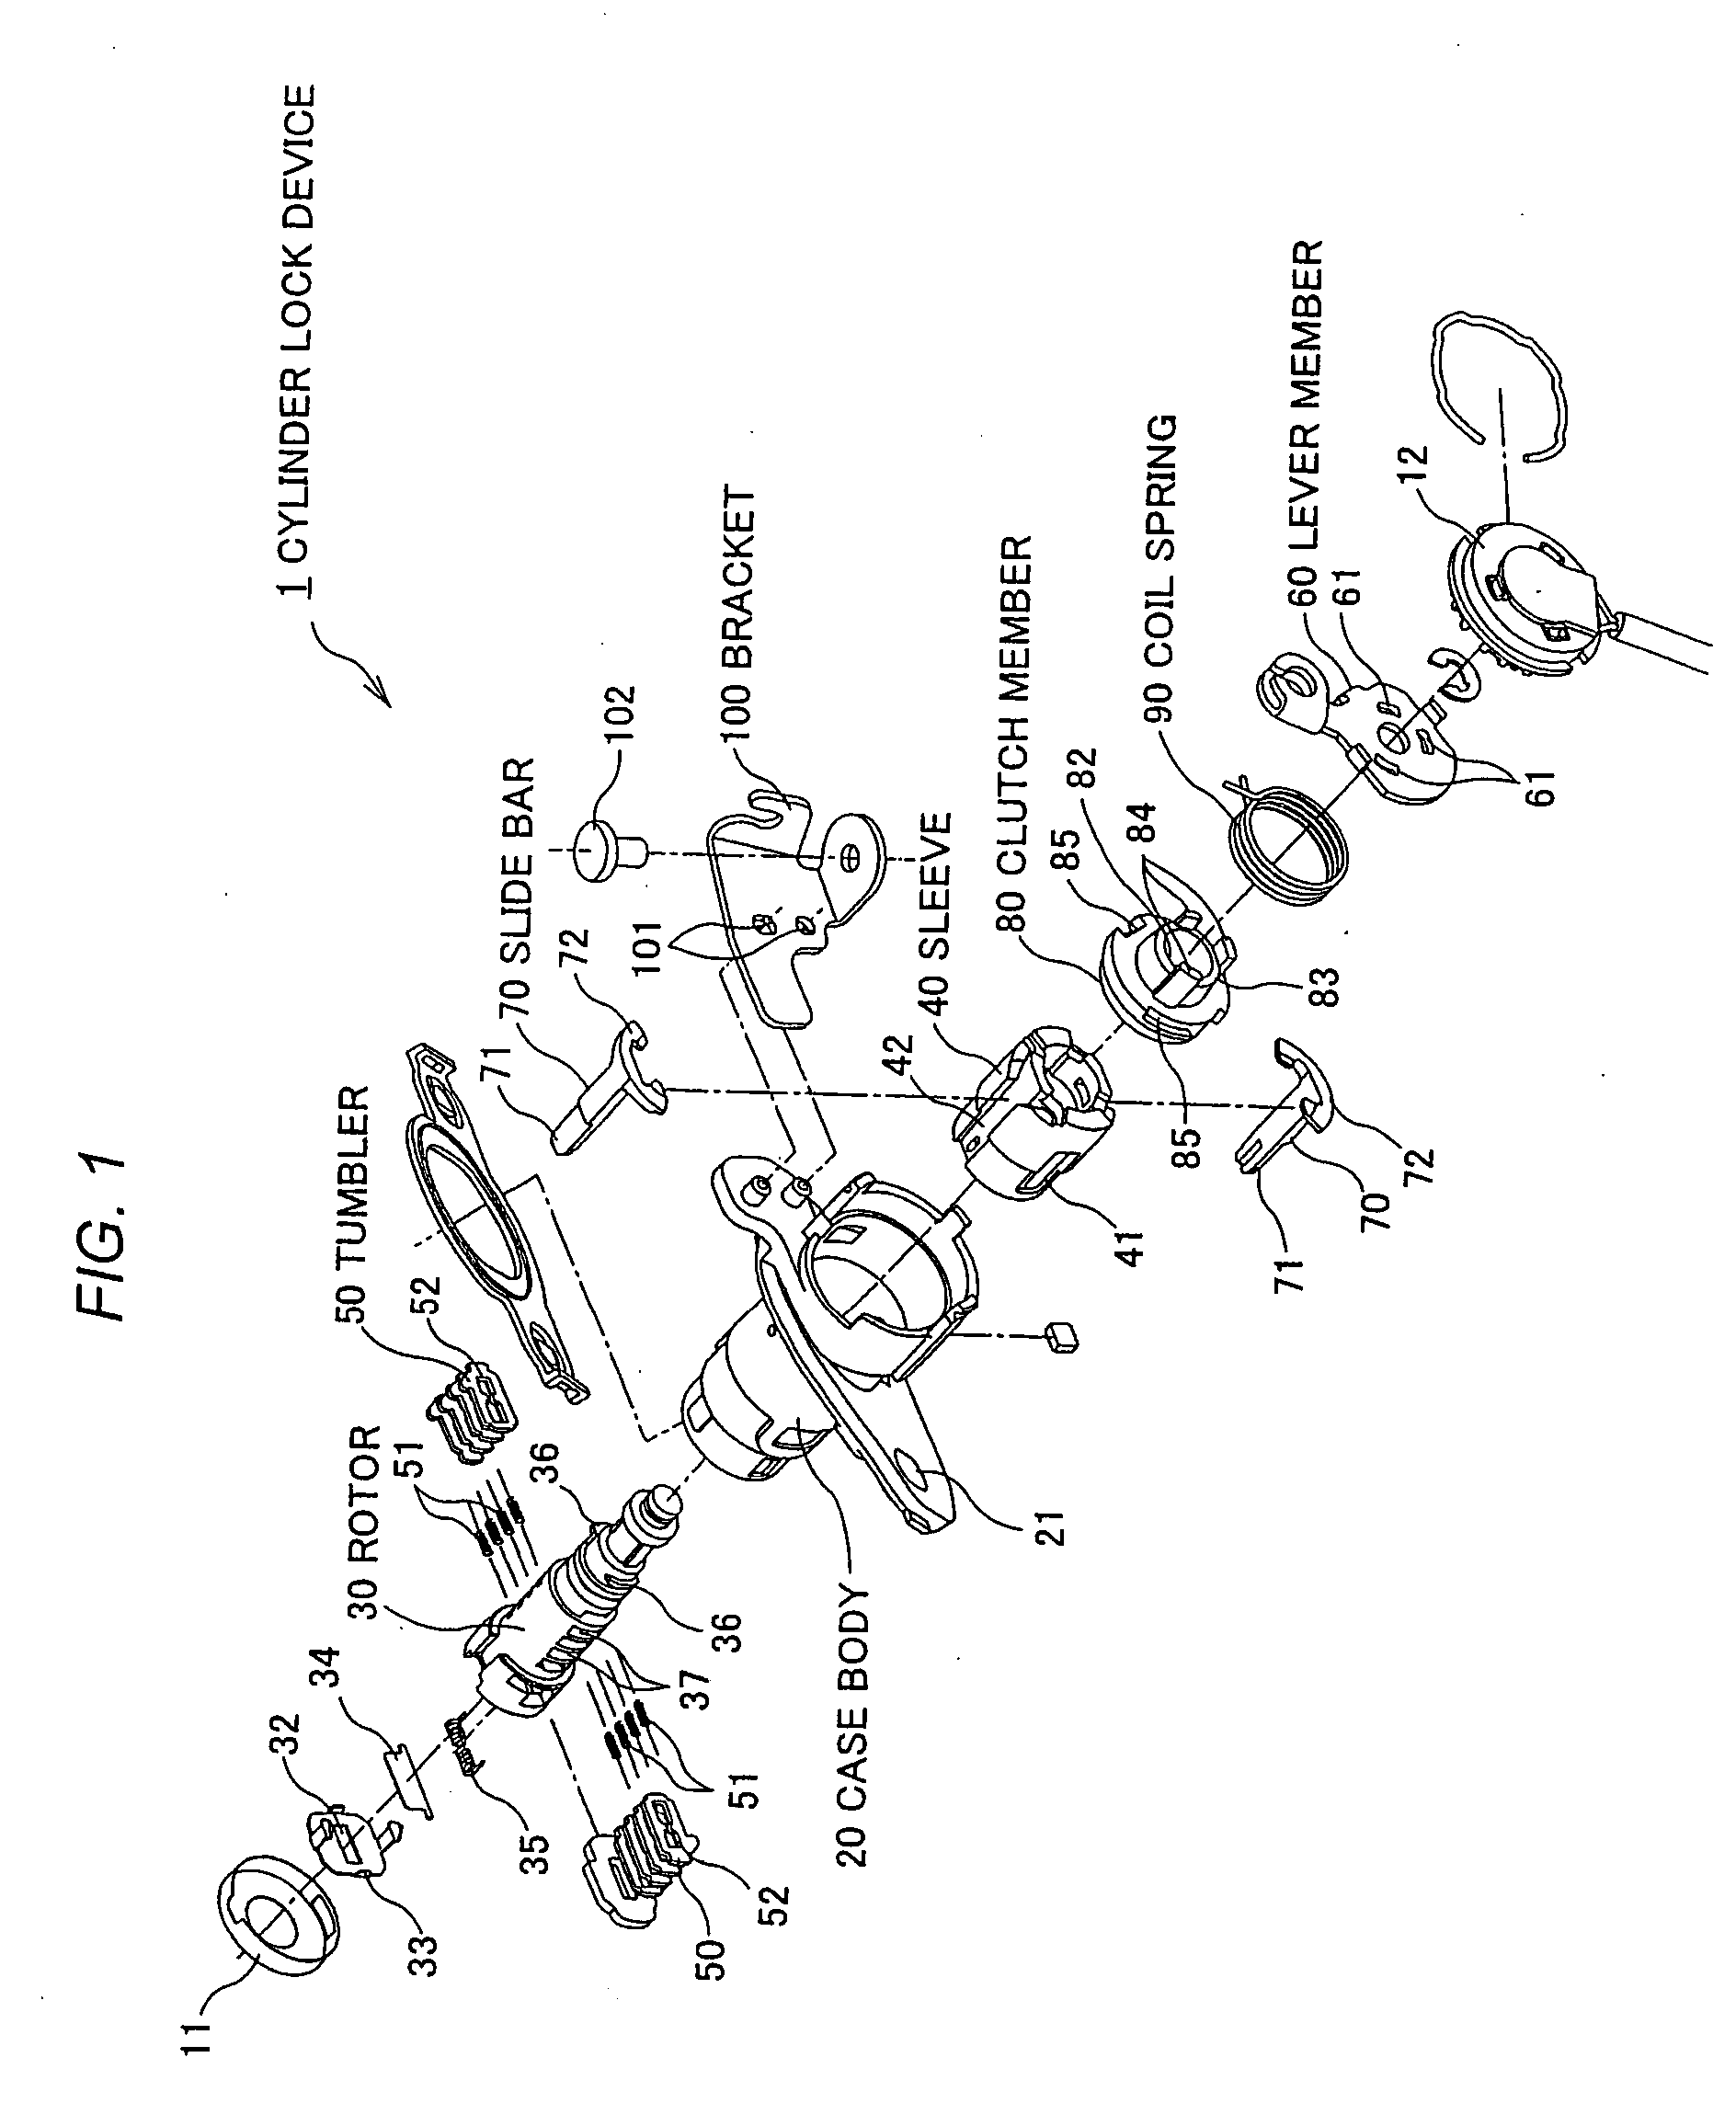 Cylinder lock device and engagement release mechanism